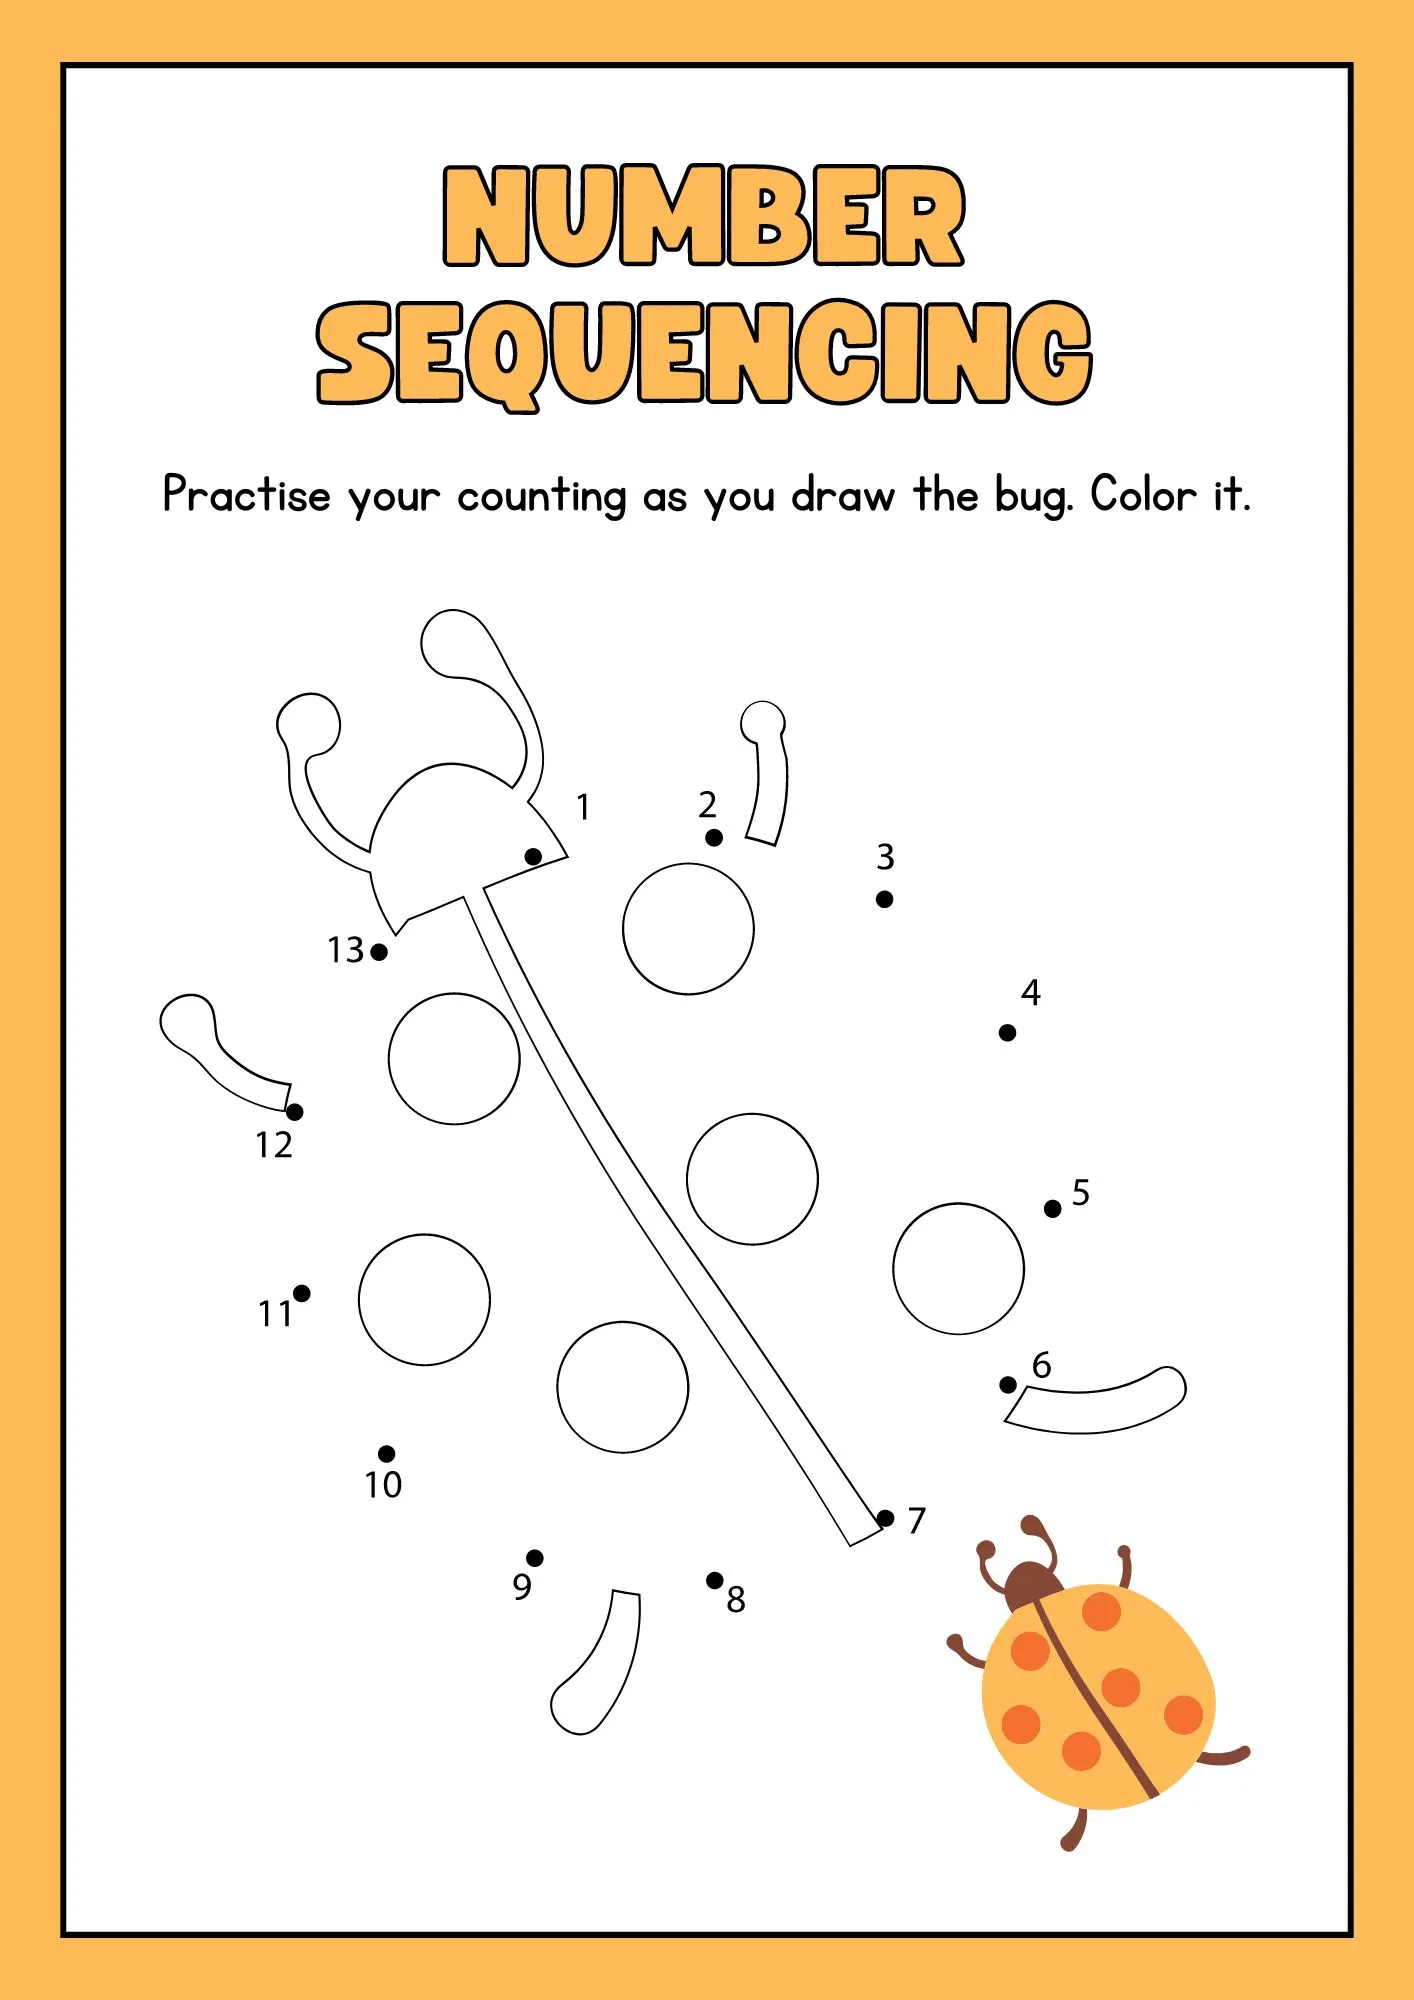 Number Sequencing Activity Worksheet trace and color the (bug)